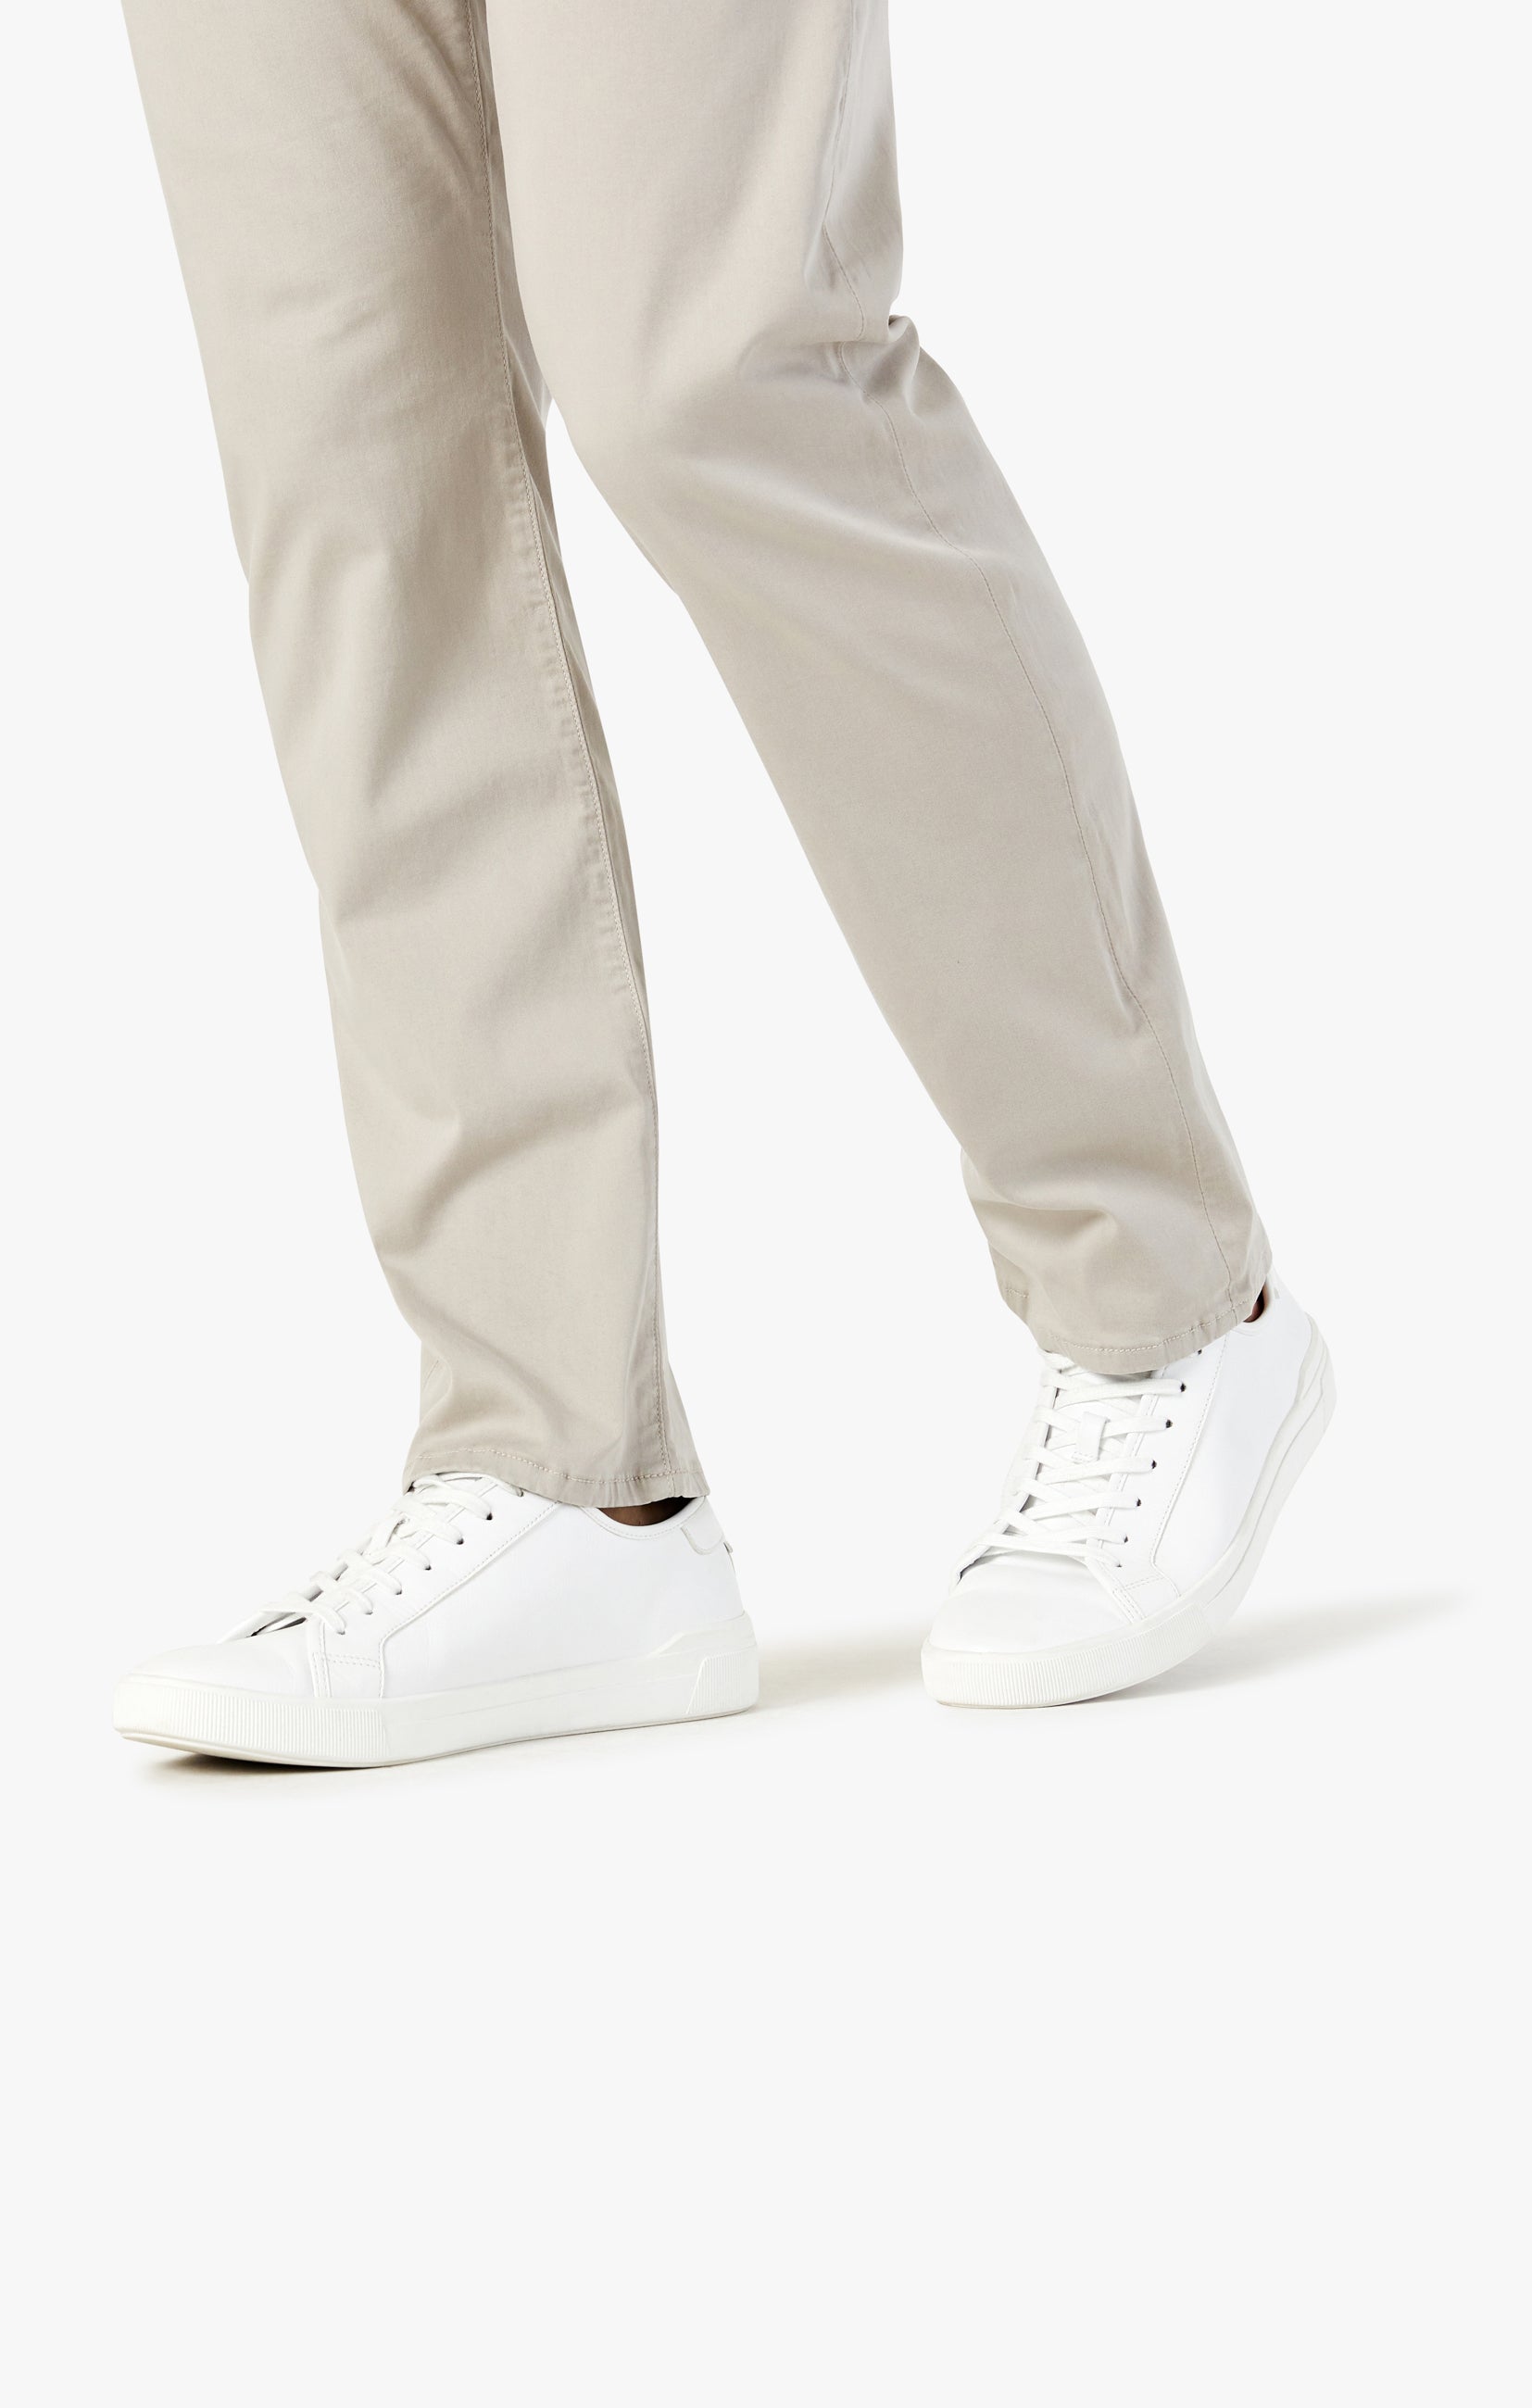 Courage Straight Leg Pants In Dawn Twill